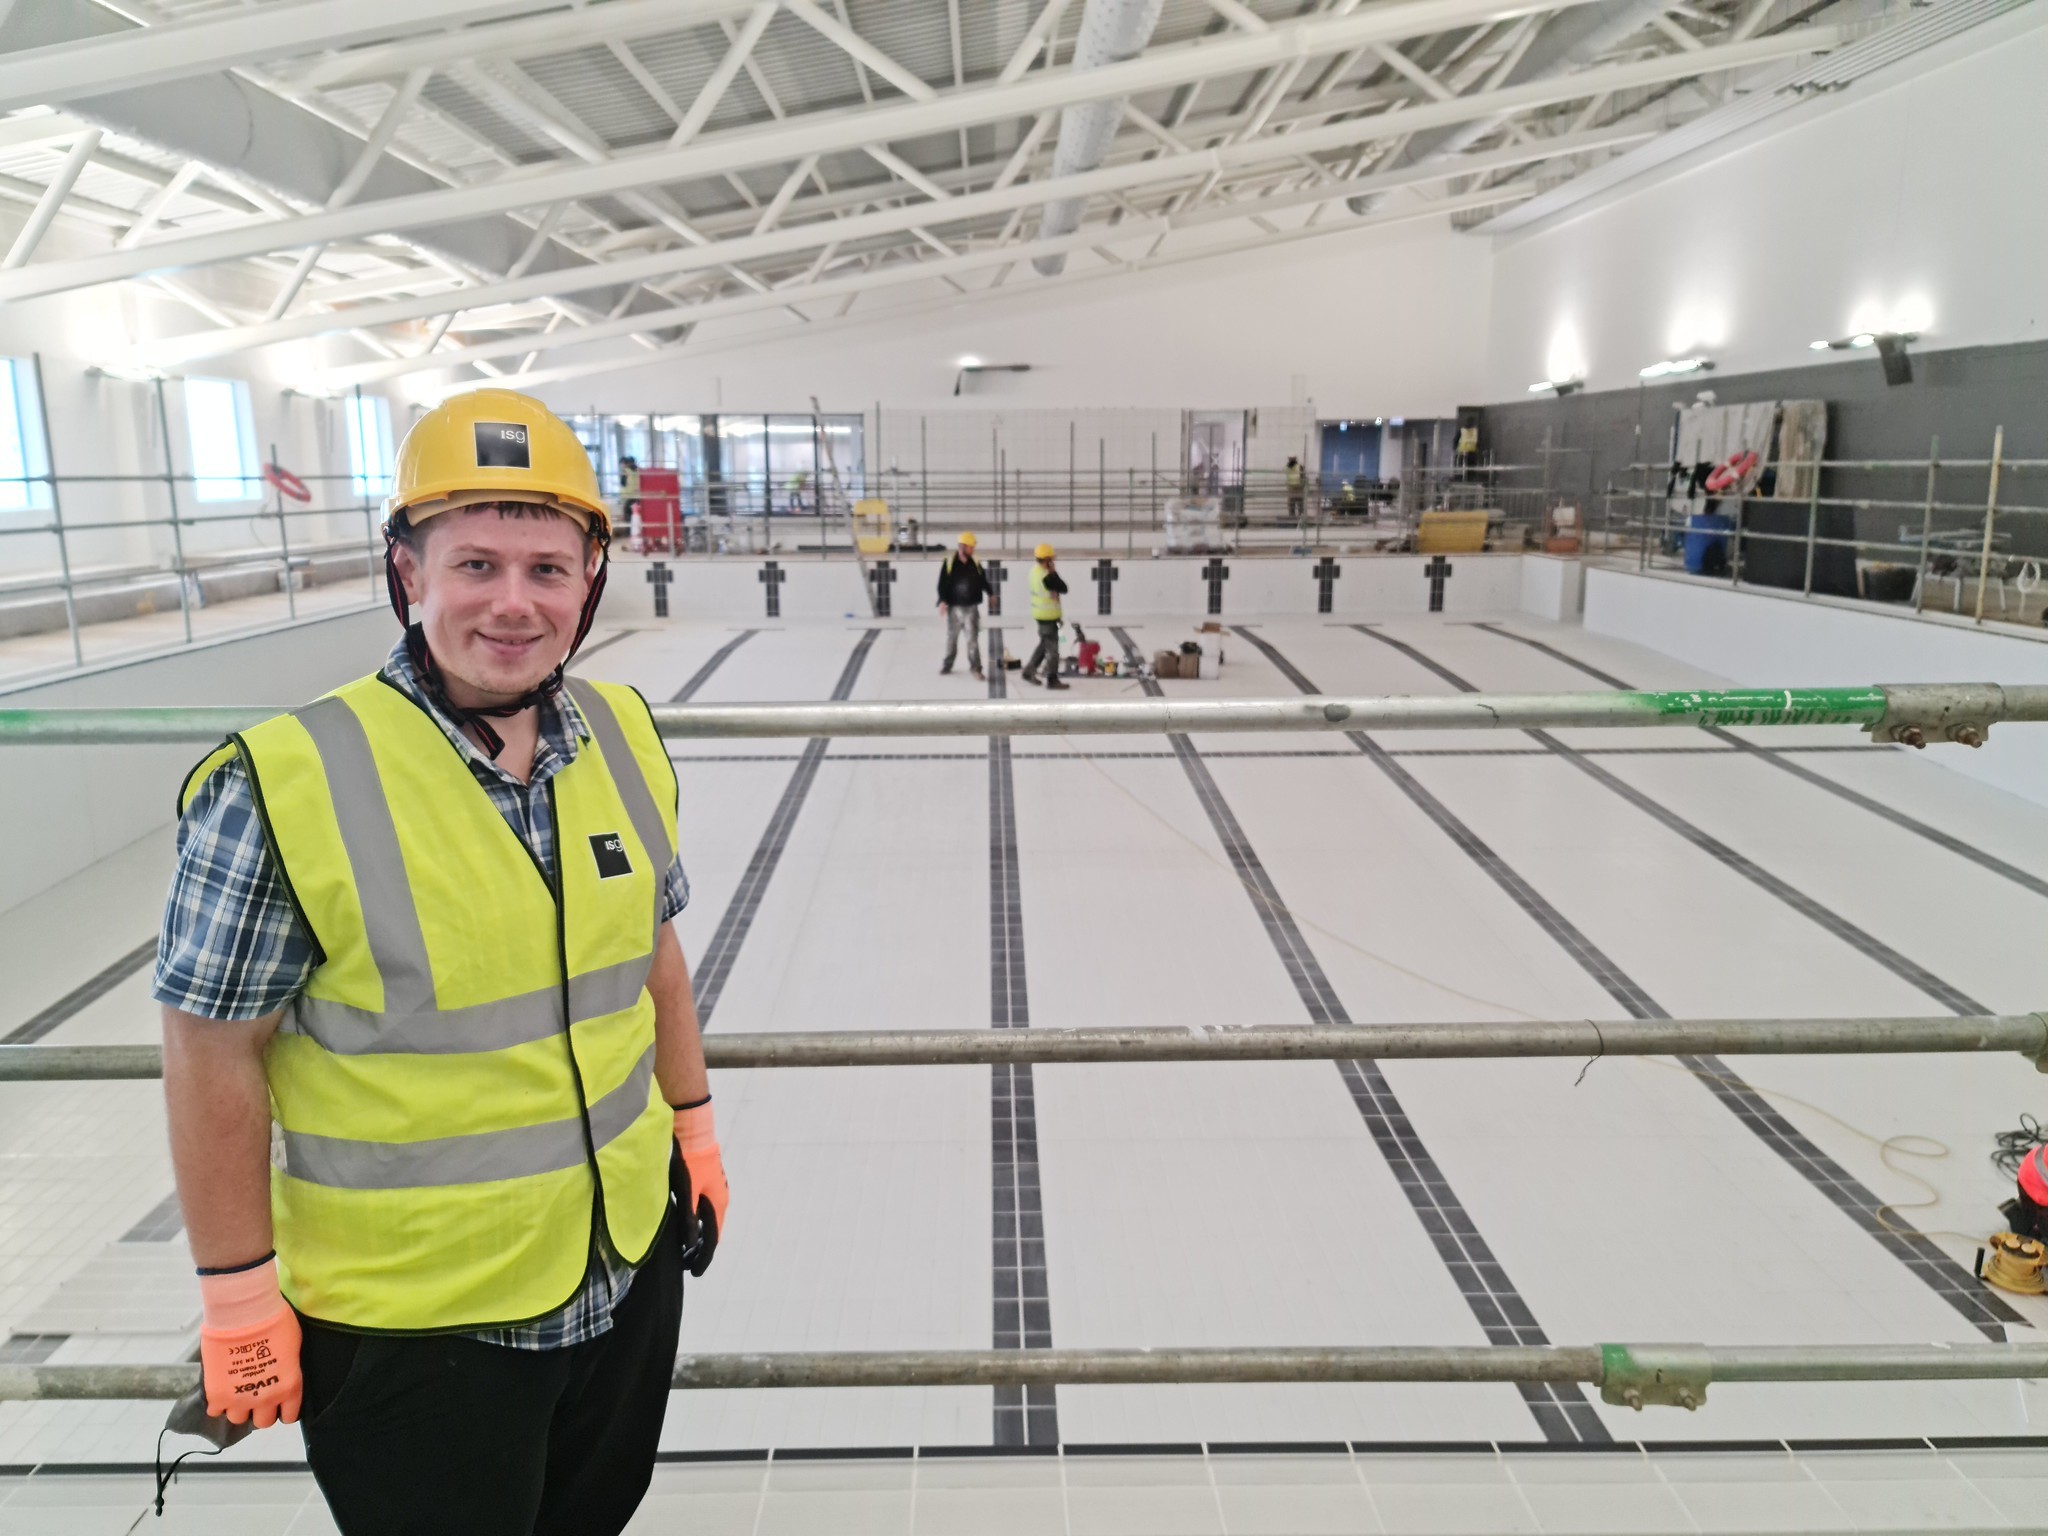 Cllr Simon Phipps, Dudleys cabinet member responsible for leisure centres, checks out the new facility